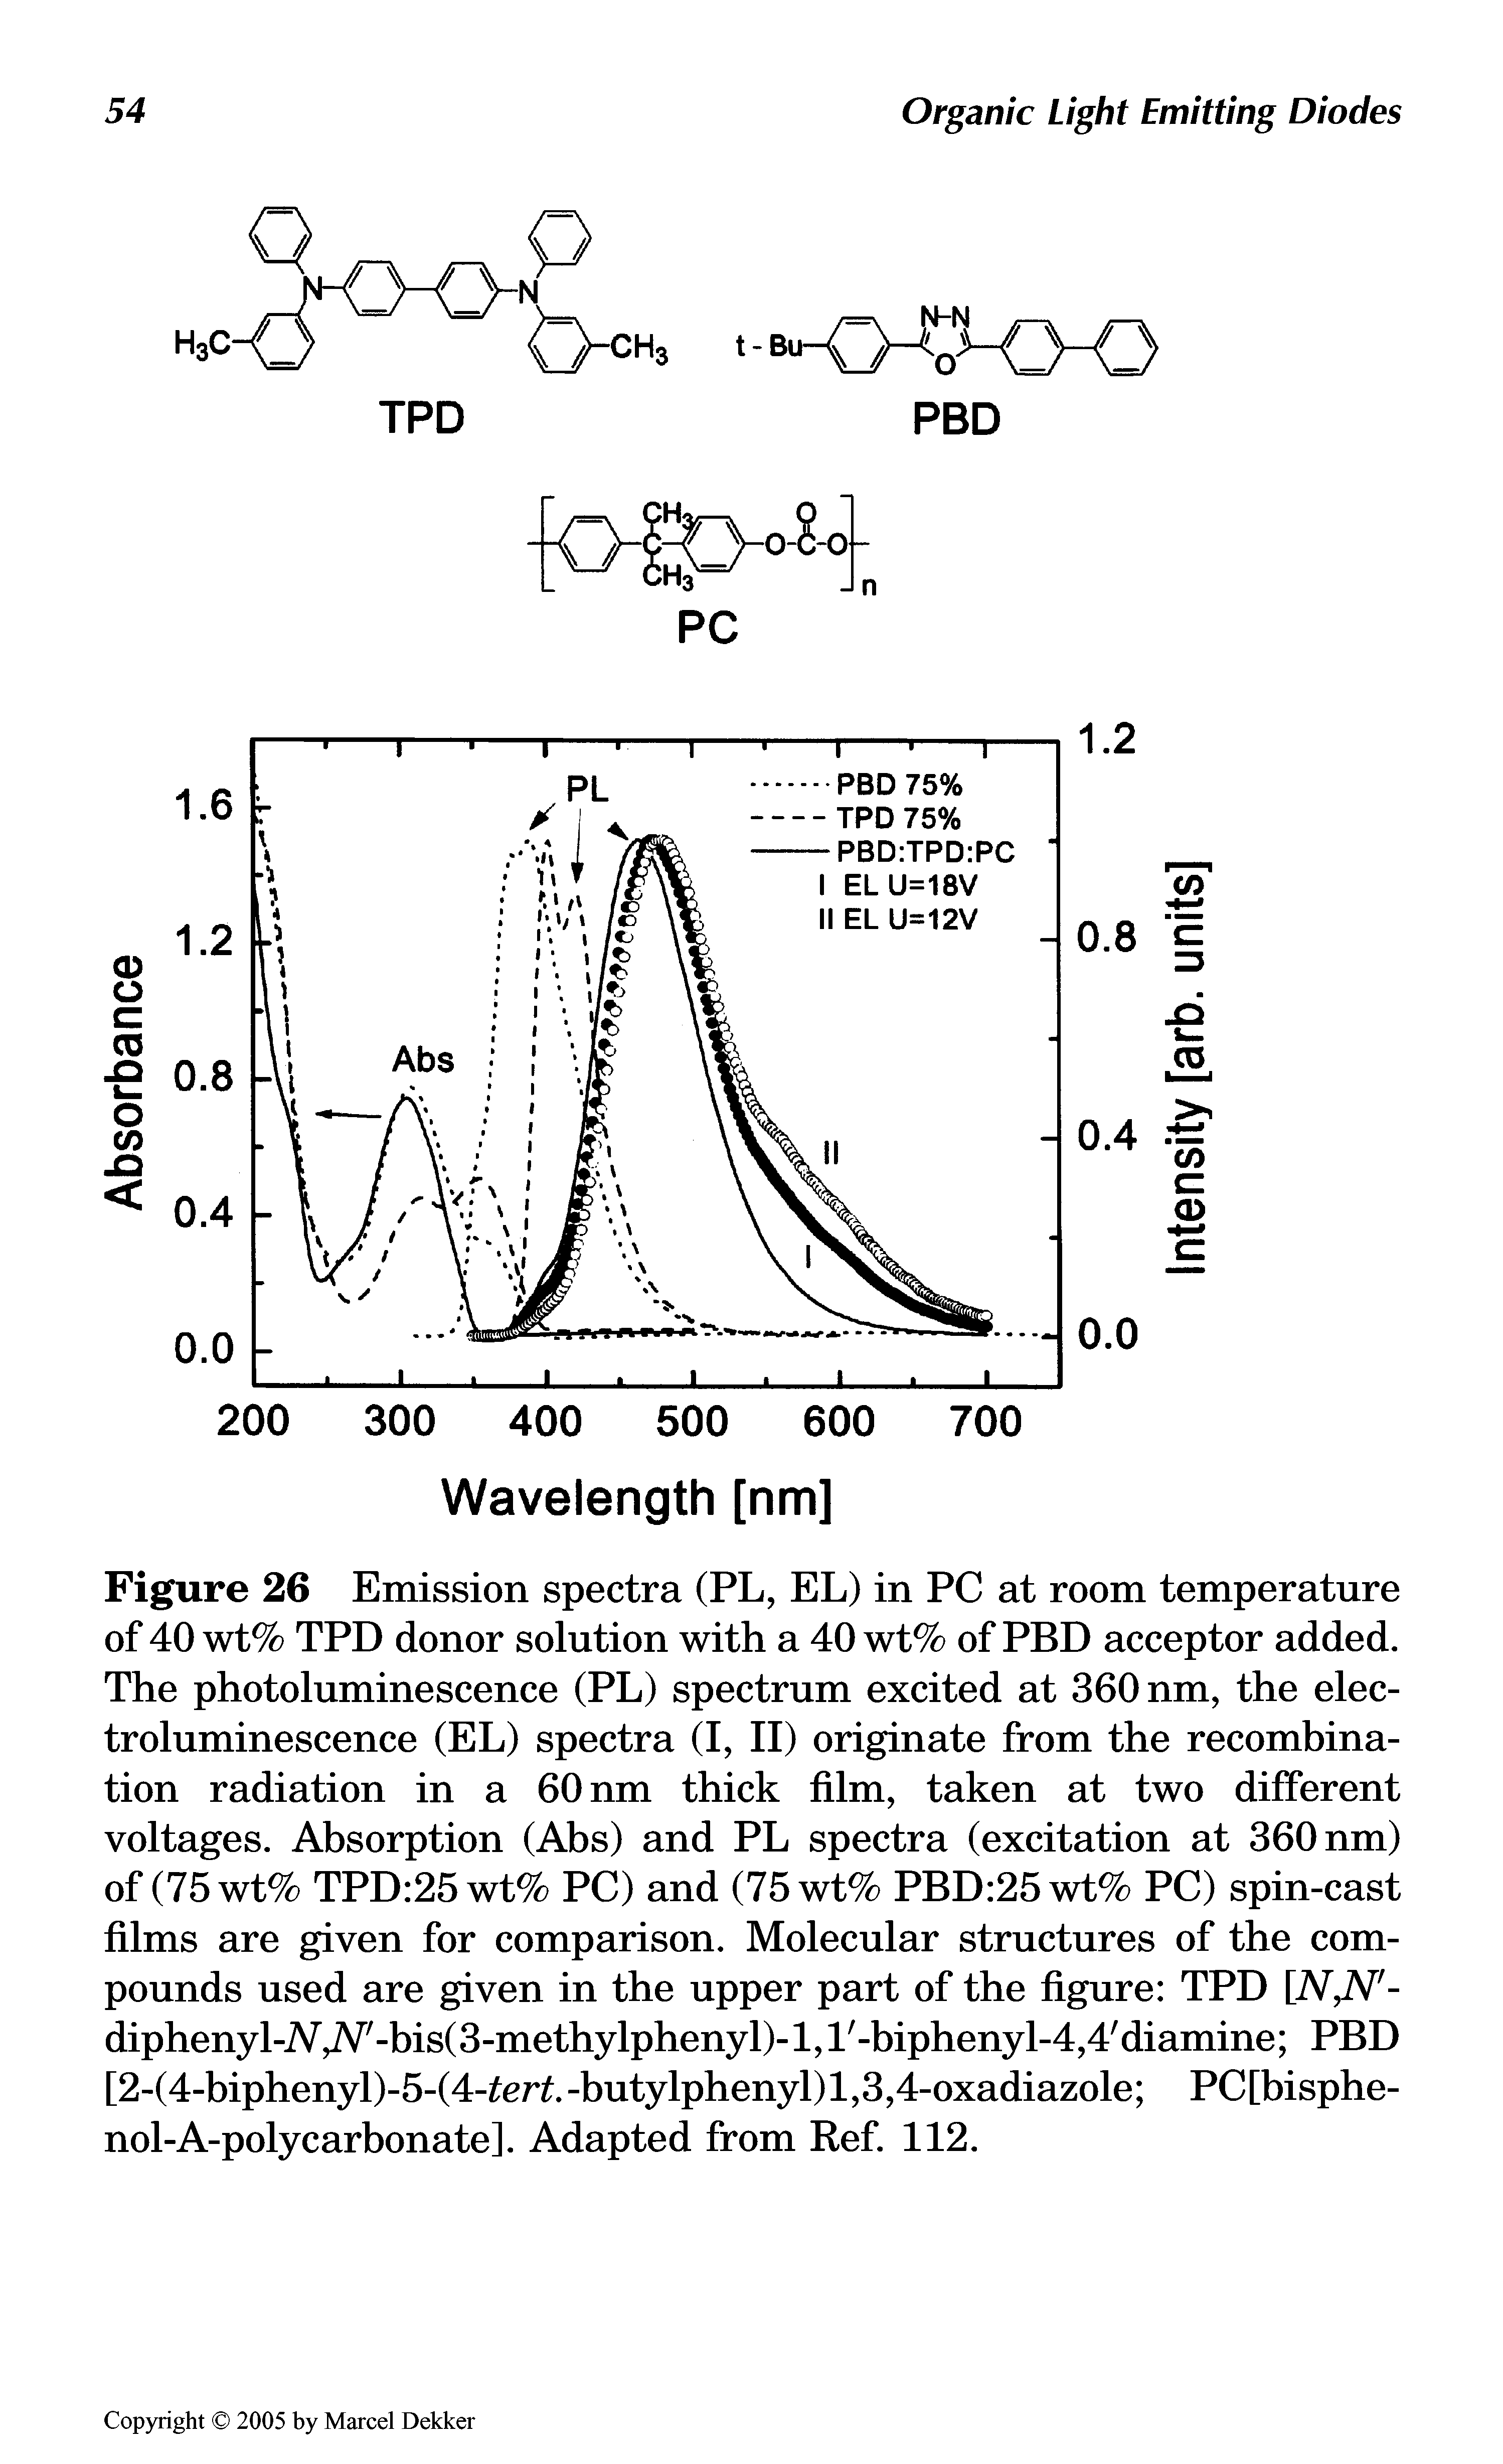 Figure 26 Emission spectra (PL, EL) in PC at room temperature of 40 wt% TPD donor solution with a 40 wt% of PBD acceptor added. The photoluminescence (PL) spectrum excited at 360 nm, the electroluminescence (EL) spectra (I, II) originate from the recombination radiation in a 60 nm thick film, taken at two different voltages. Absorption (Abs) and PL spectra (excitation at 360 nm) of (75wt% TPD 25wt% PC) and (75wt% PBD 25wt% PC) spin-cast films are given for comparison. Molecular structures of the compounds used are given in the upper part of the figure TPD [N,Nf-diphenyl-A v/V/-bis(3-methylphenyl)-l,l -biphenyl-4,4 diamine PBD [2-(4-biphenyl)-5-(4- er .-butylphenyl)l,3,4-oxadiazole PC[bisphe-nol-A-polycarbonate]. Adapted from Ref. 112.